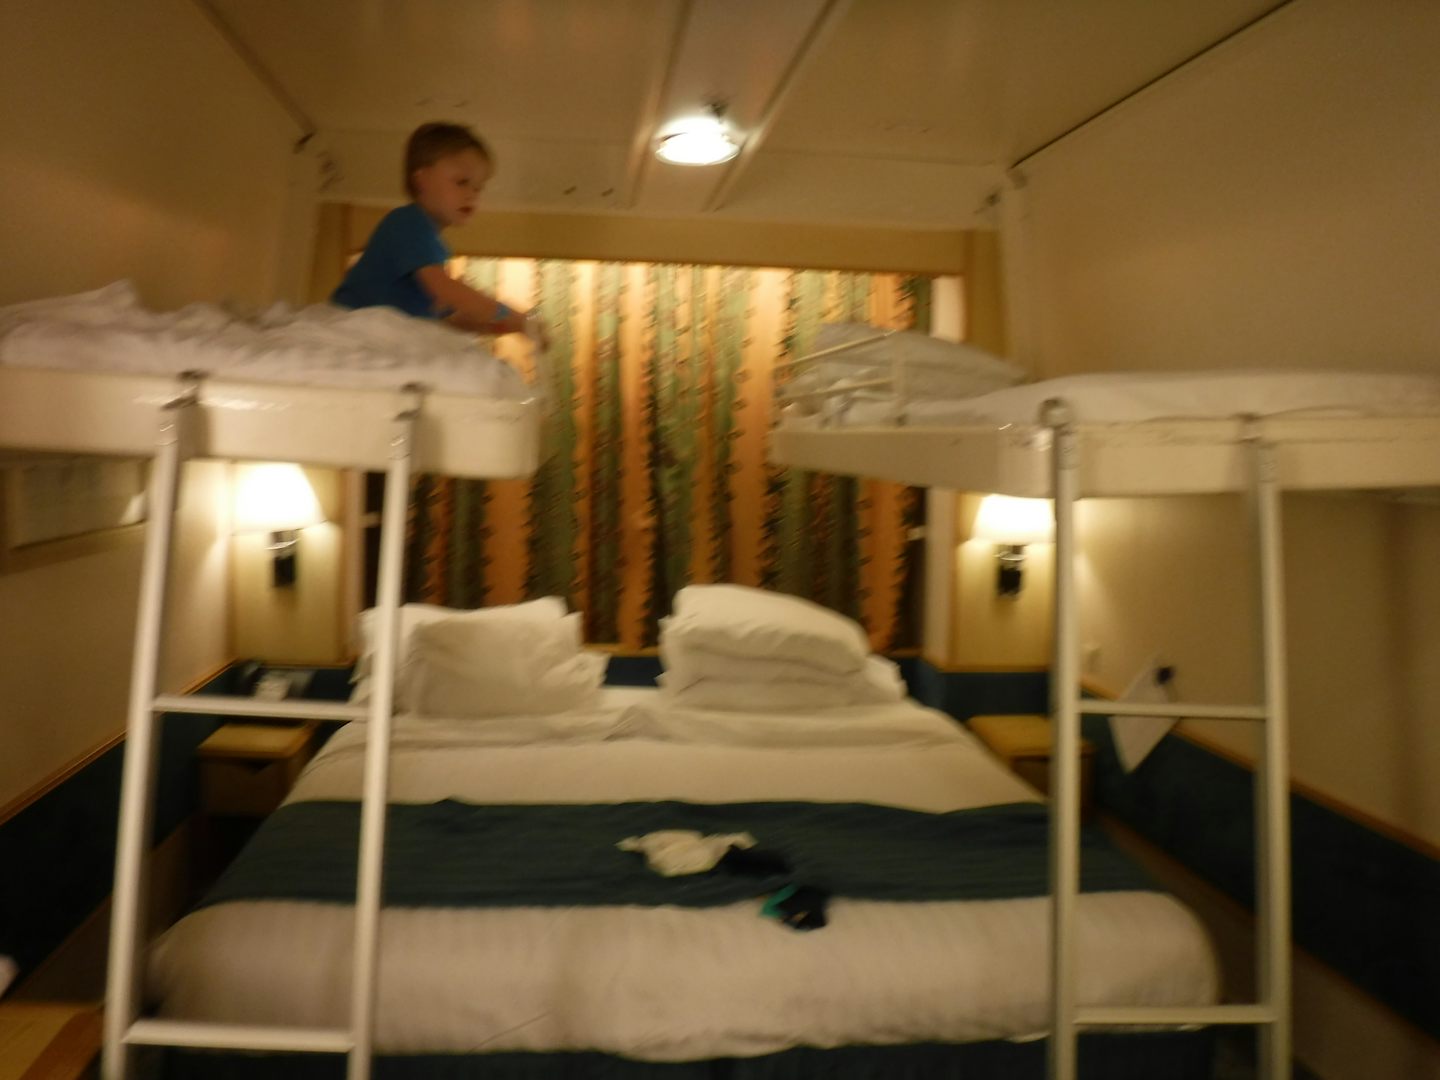 Bunk beds that pull down